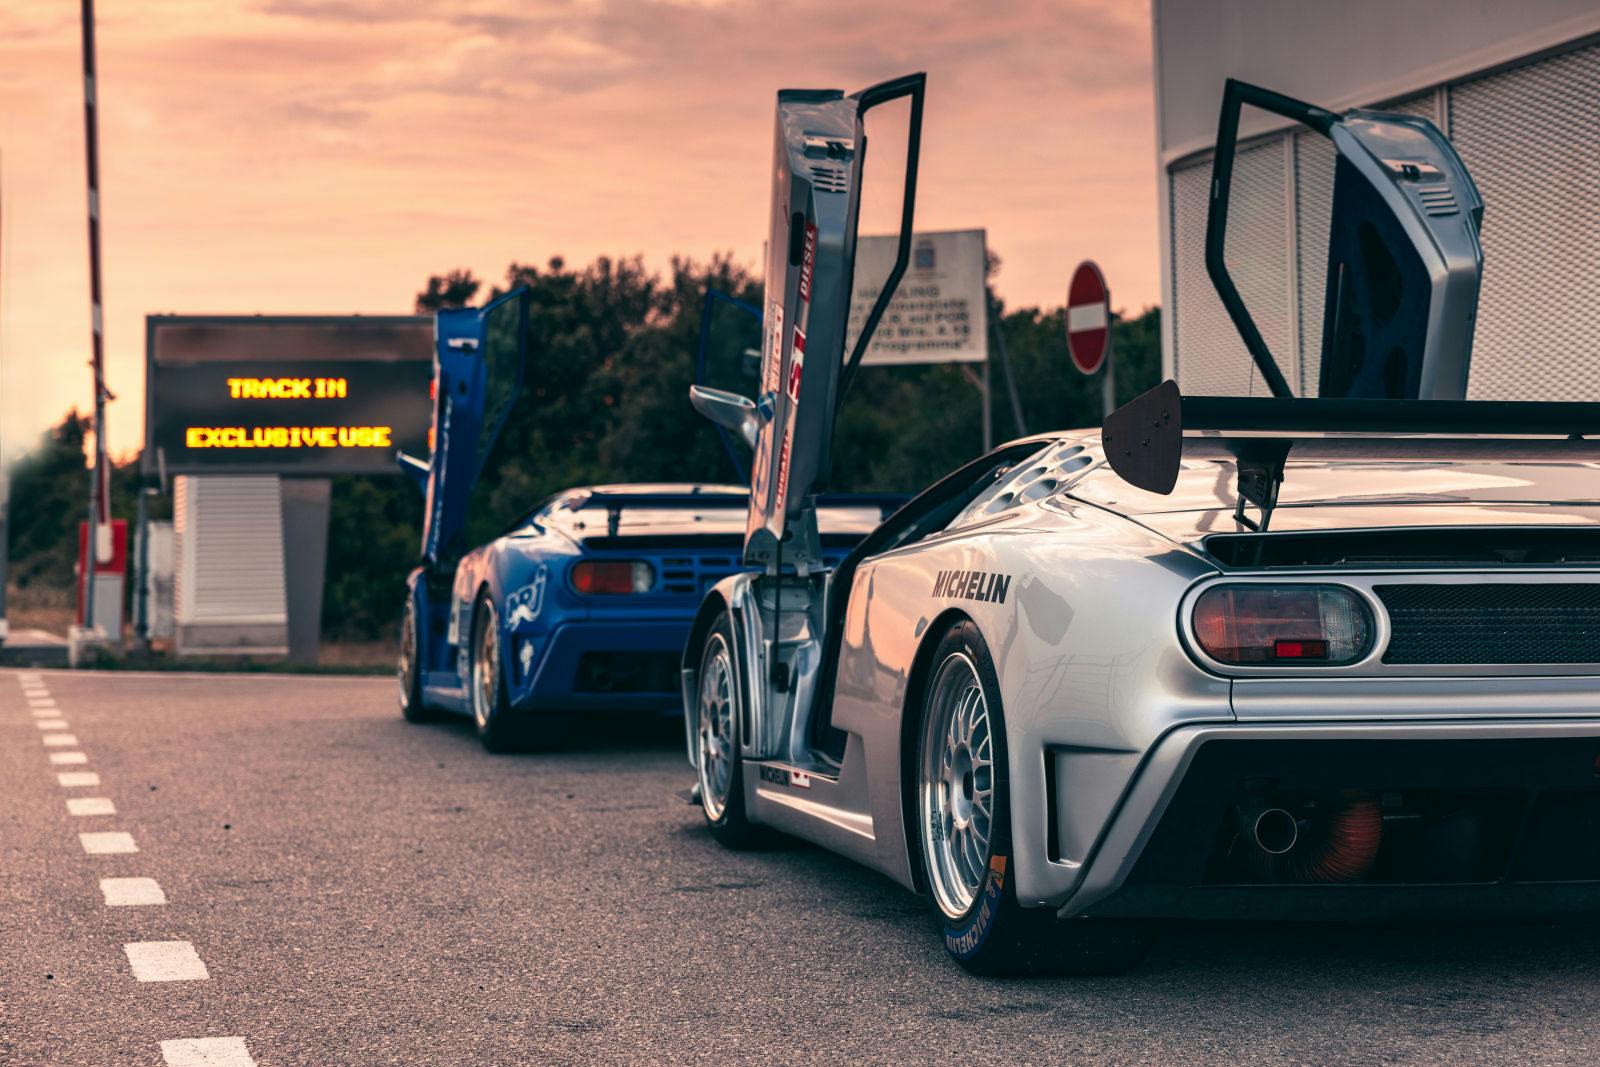 The EB110 LM and EB 110 Sport Competizione (SC) ready to hit their natural habitat: the racetrack.